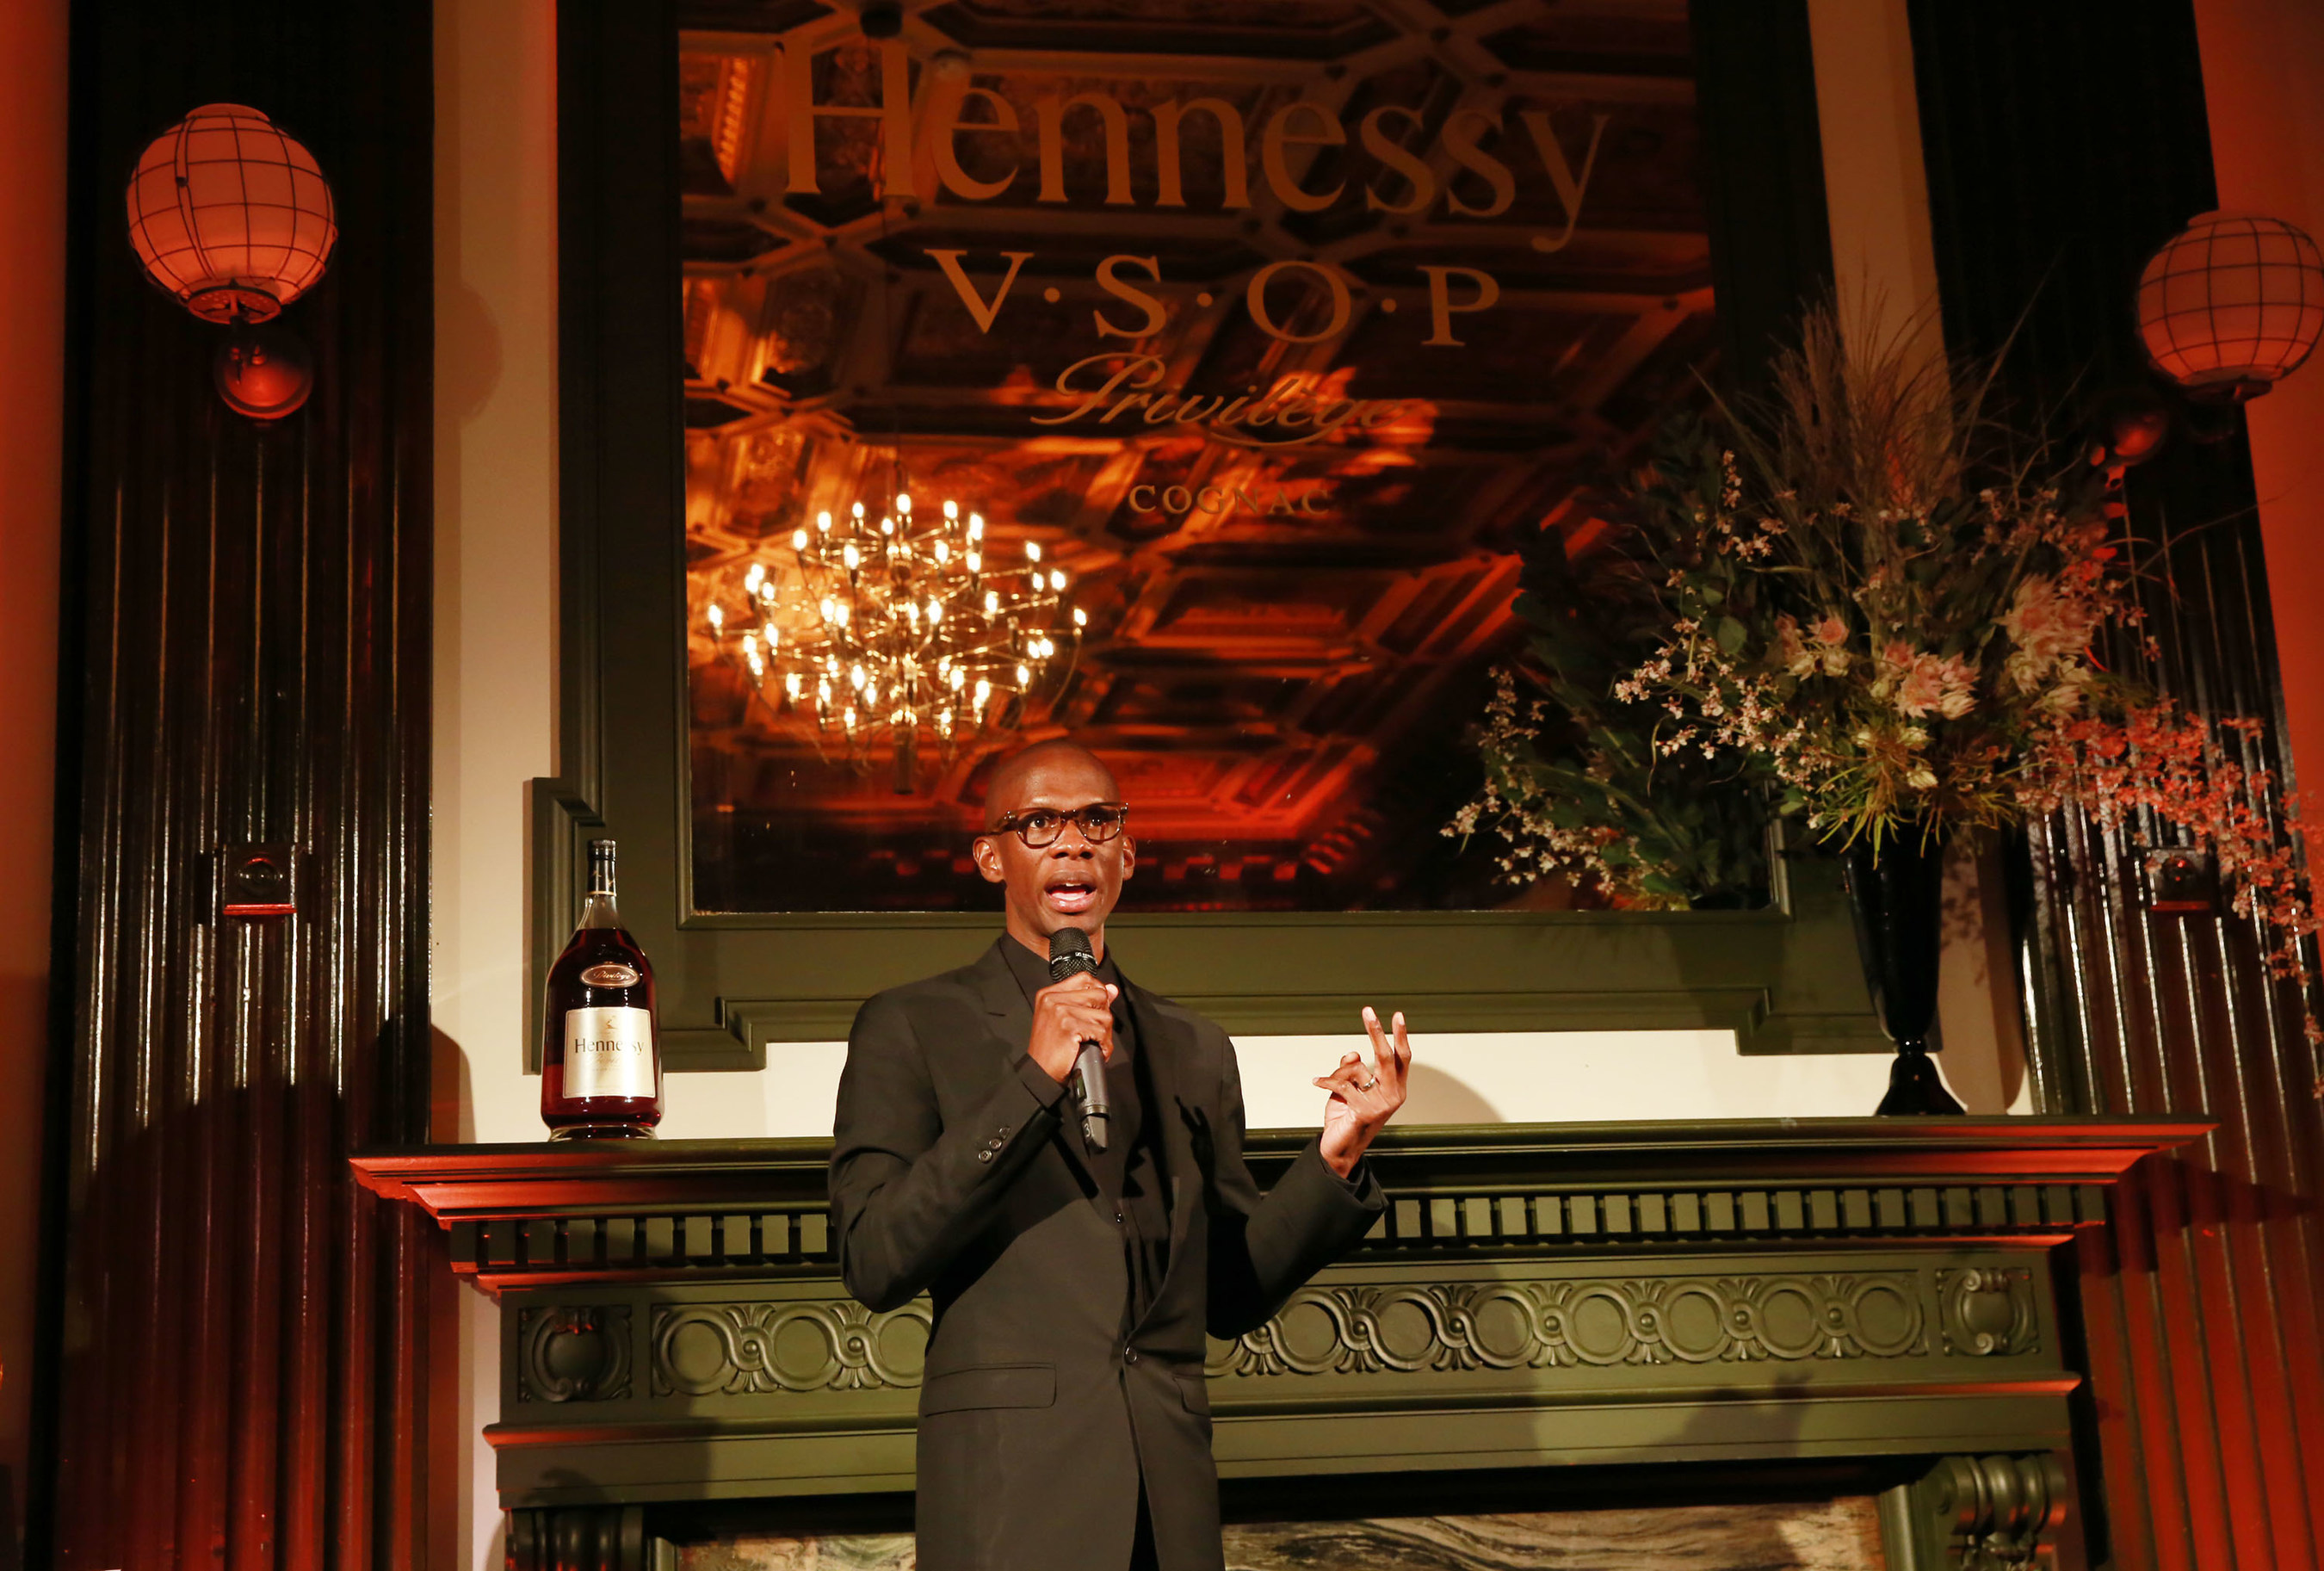 Investor, entrepreneur and manager Troy Carter accepts the 12th annual Hennessy V.S.O.P Privilège Award on October 8, 2015 at WeWork Bryant Park in New York City.  Hennessy recognized Mr. Carter for his efforts in redefining entrepreneurship before announcing the Hennessy V.S.O.P Privilège Lab, a partnership with WeWork that will provide an emerging business with a year's worth of mentorship, community and free office space. (Photo by Amy Sussman/Invision for Hennessy/AP Images)